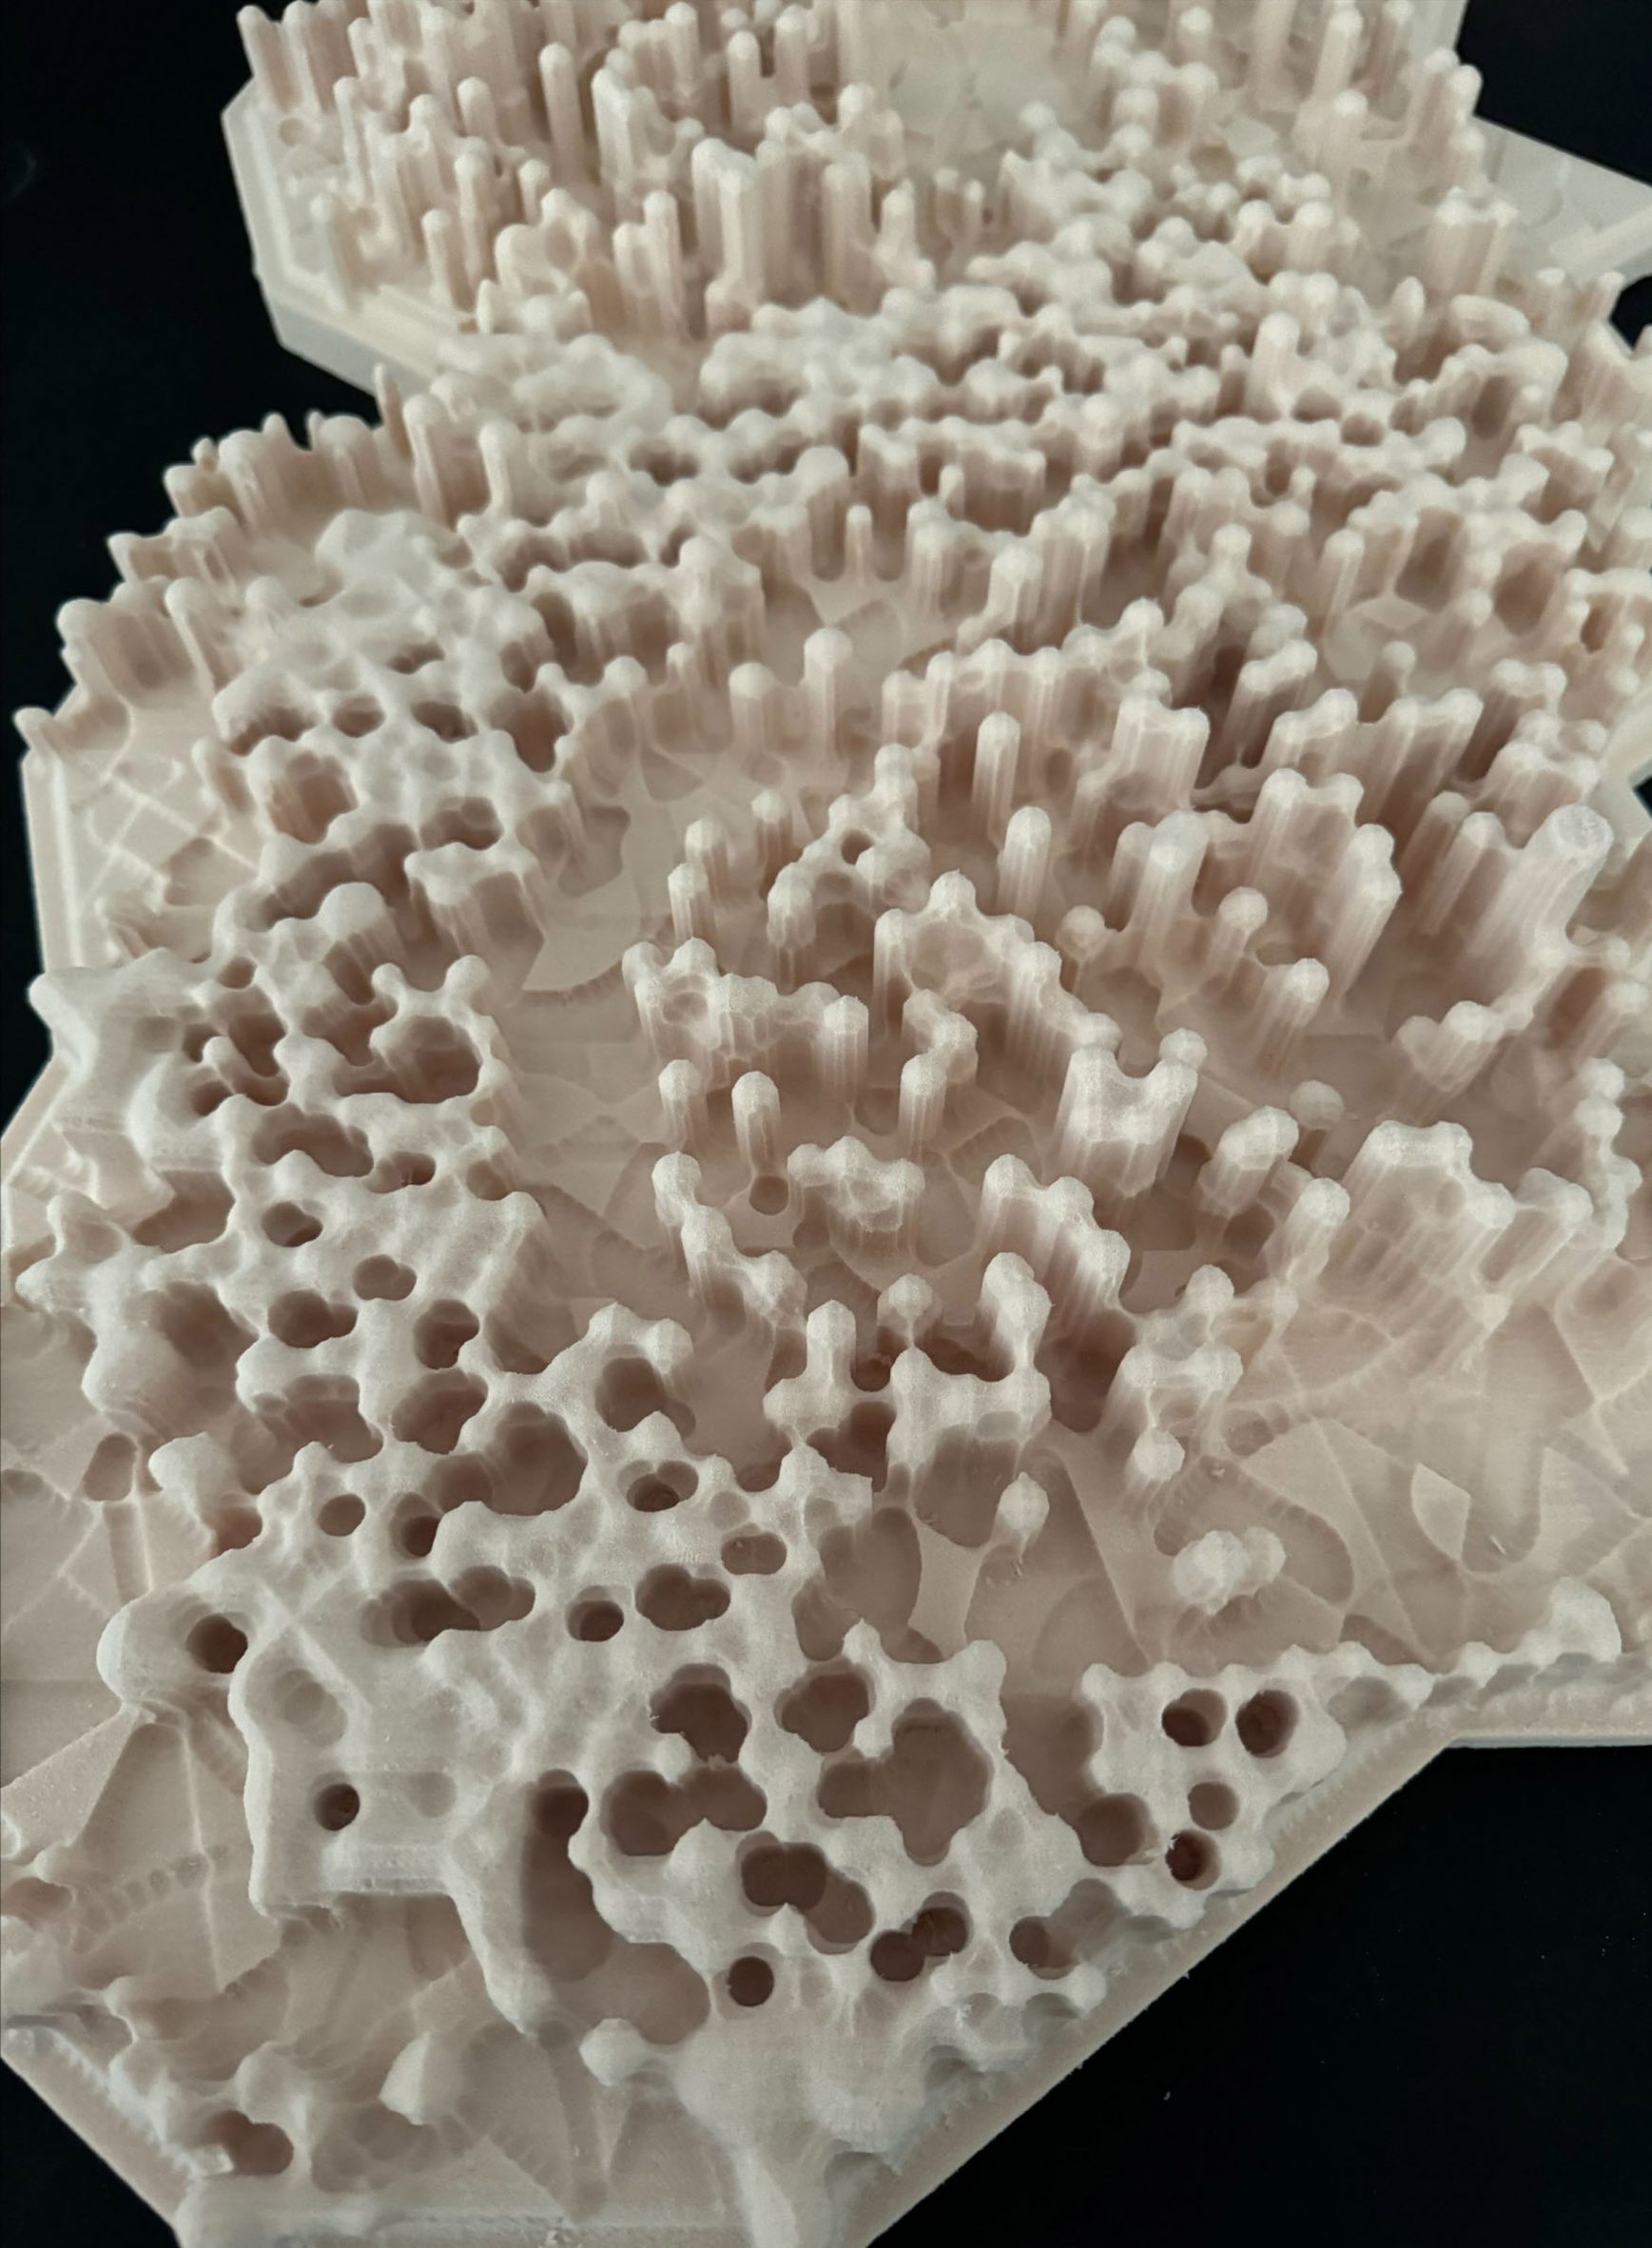 Close up of a 3D-printed object